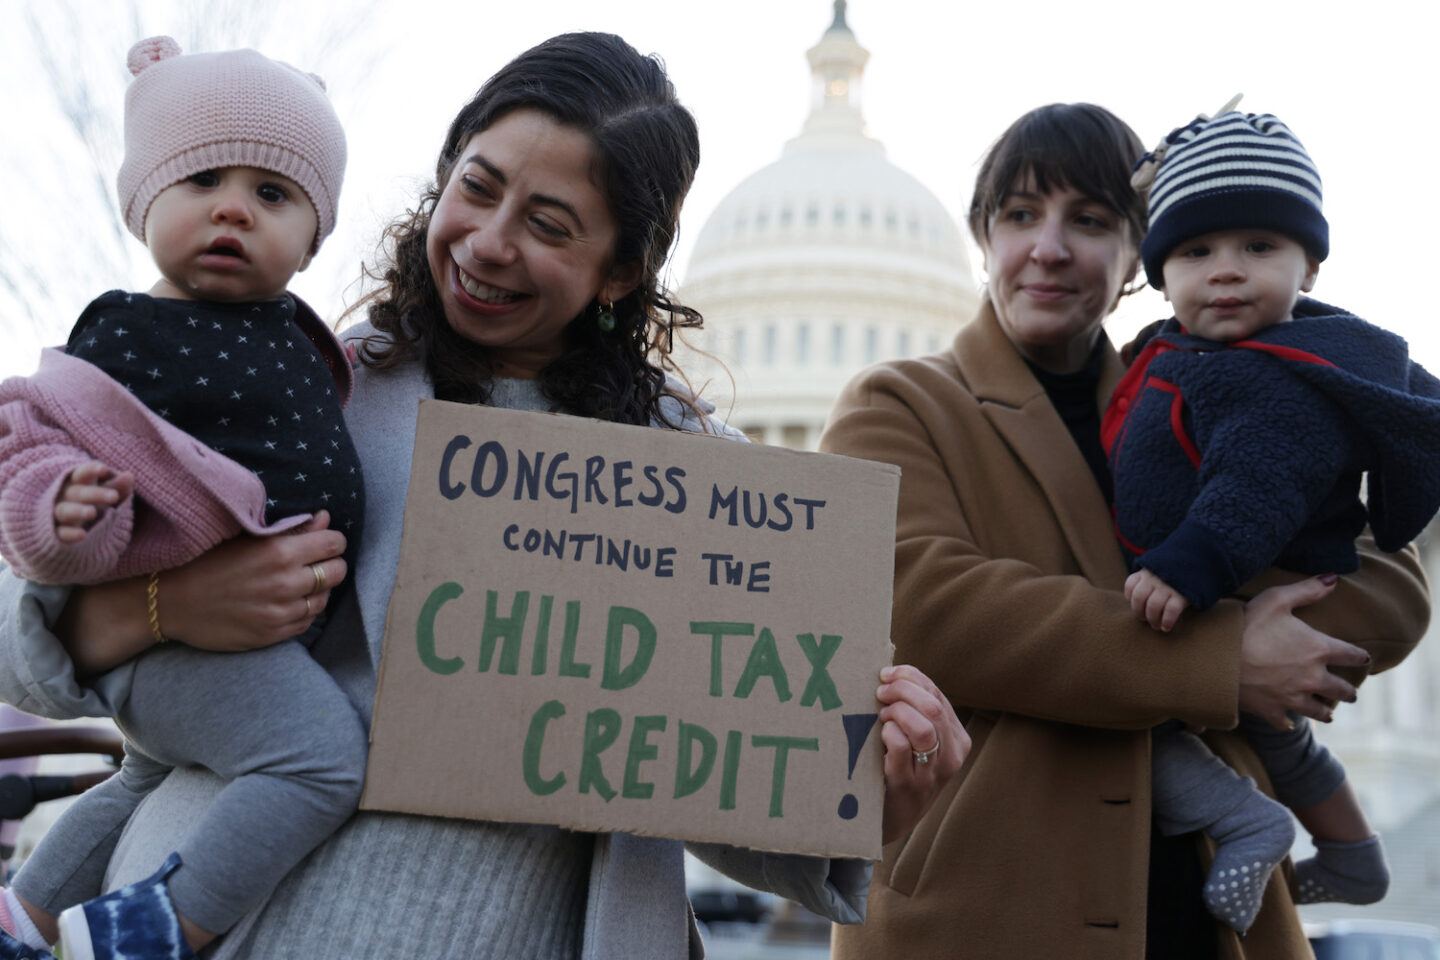 Mothers holding babies outside of Congress